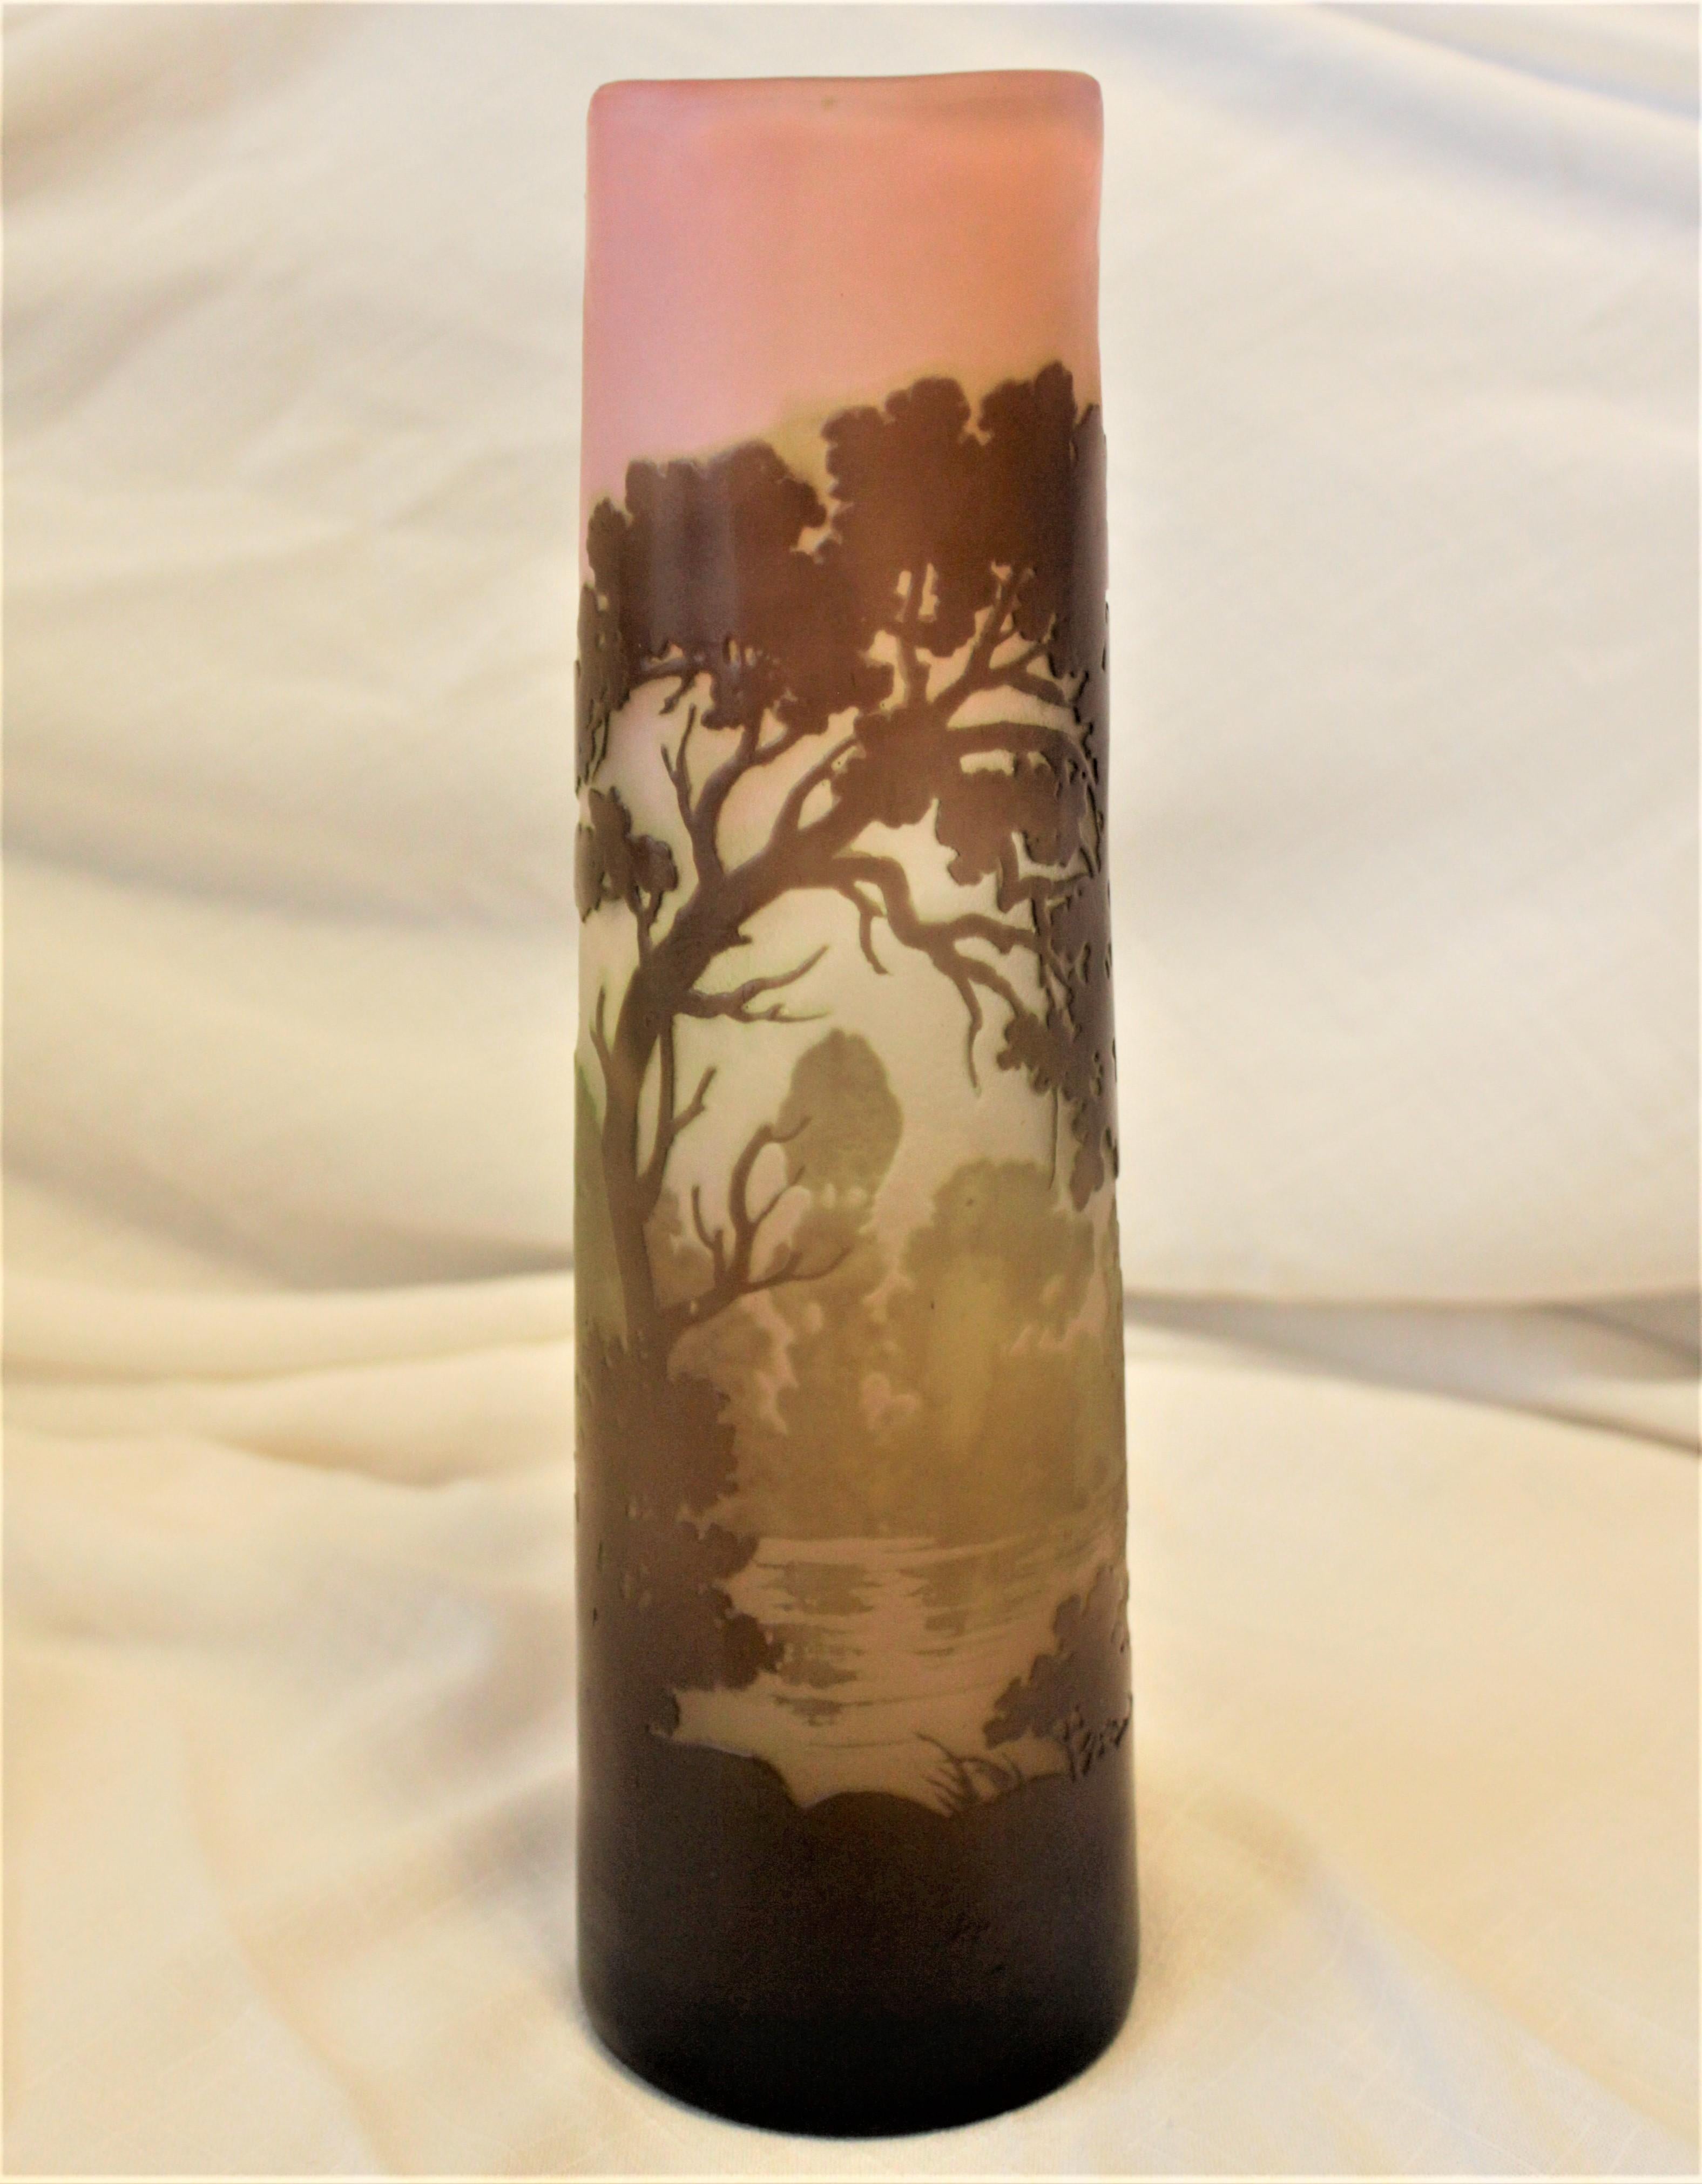 This antique signed Galle vase was made in France in approximately 1900 in the period Art Nouveau style. The vase in done in multiple layers of colored glass that's been etched, cut and polished to reveal a country landscape with a brook in the